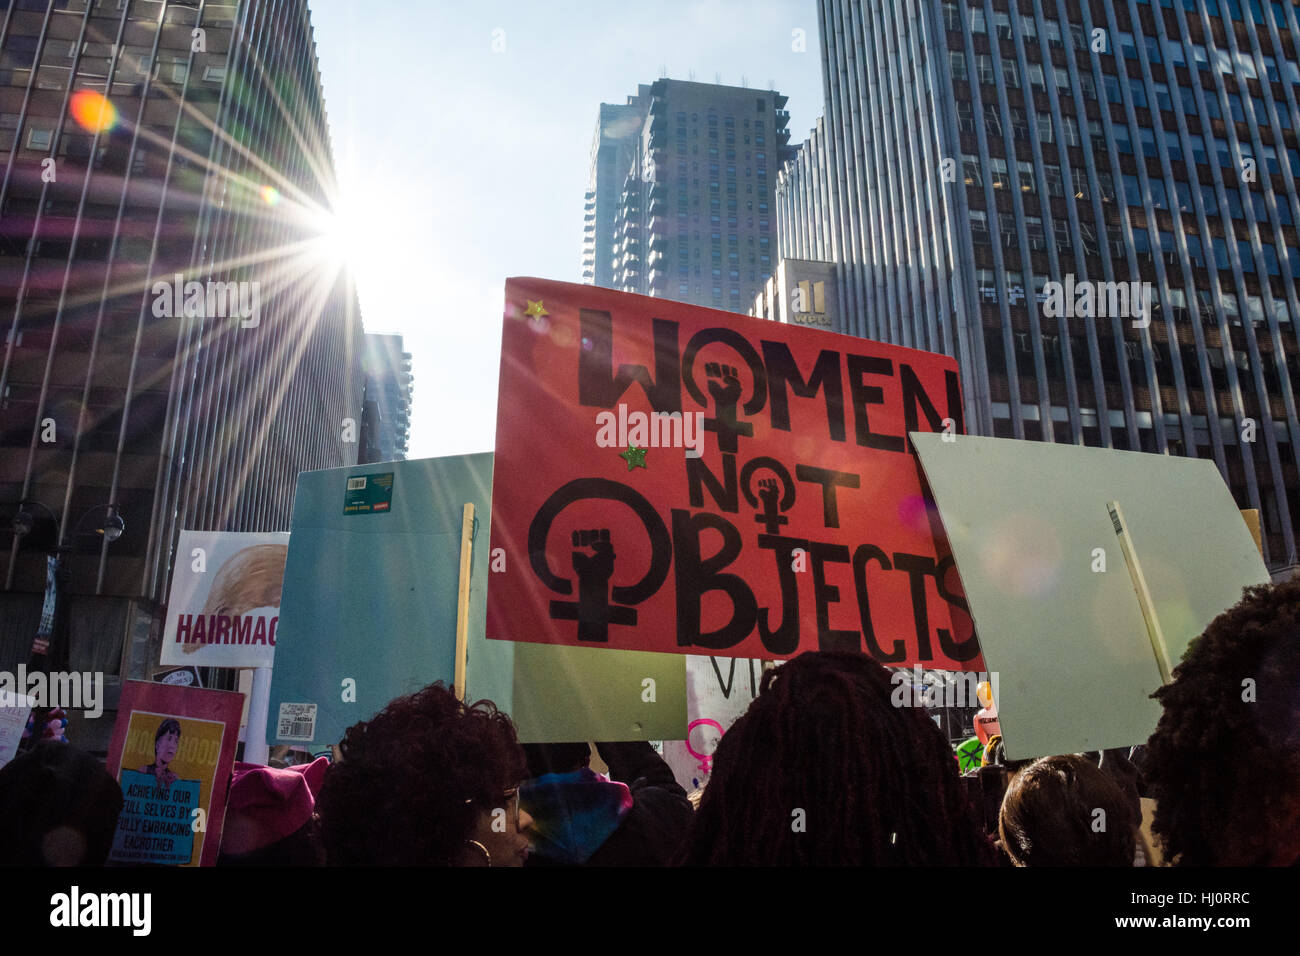 New York, NY, USA. 21st January 2017. Women's March on NYC.  A protester carries a sign that says 'Women, Not Objects' during the march. Credit: Matthew Cherchio/Alamy Live News Stock Photo